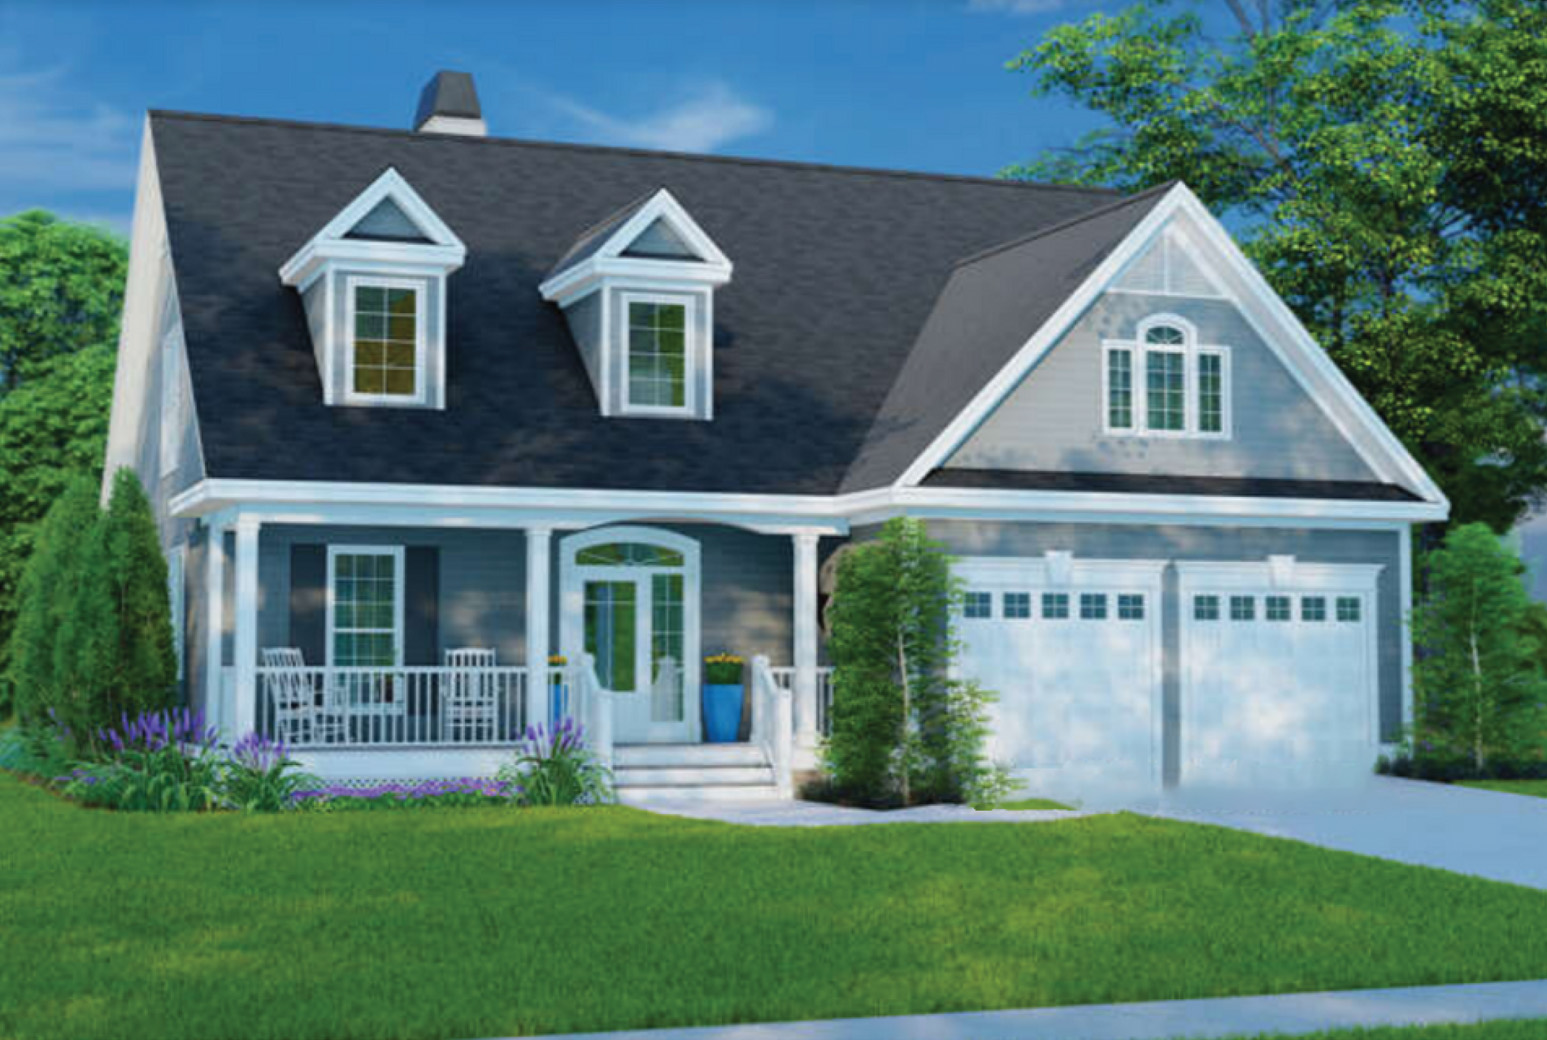 Rising Tide Homes: The Sycamore - 3 BR  2.5 BA  |  2,046 SF TWO-STORY W/ 2 CAR GARAGE